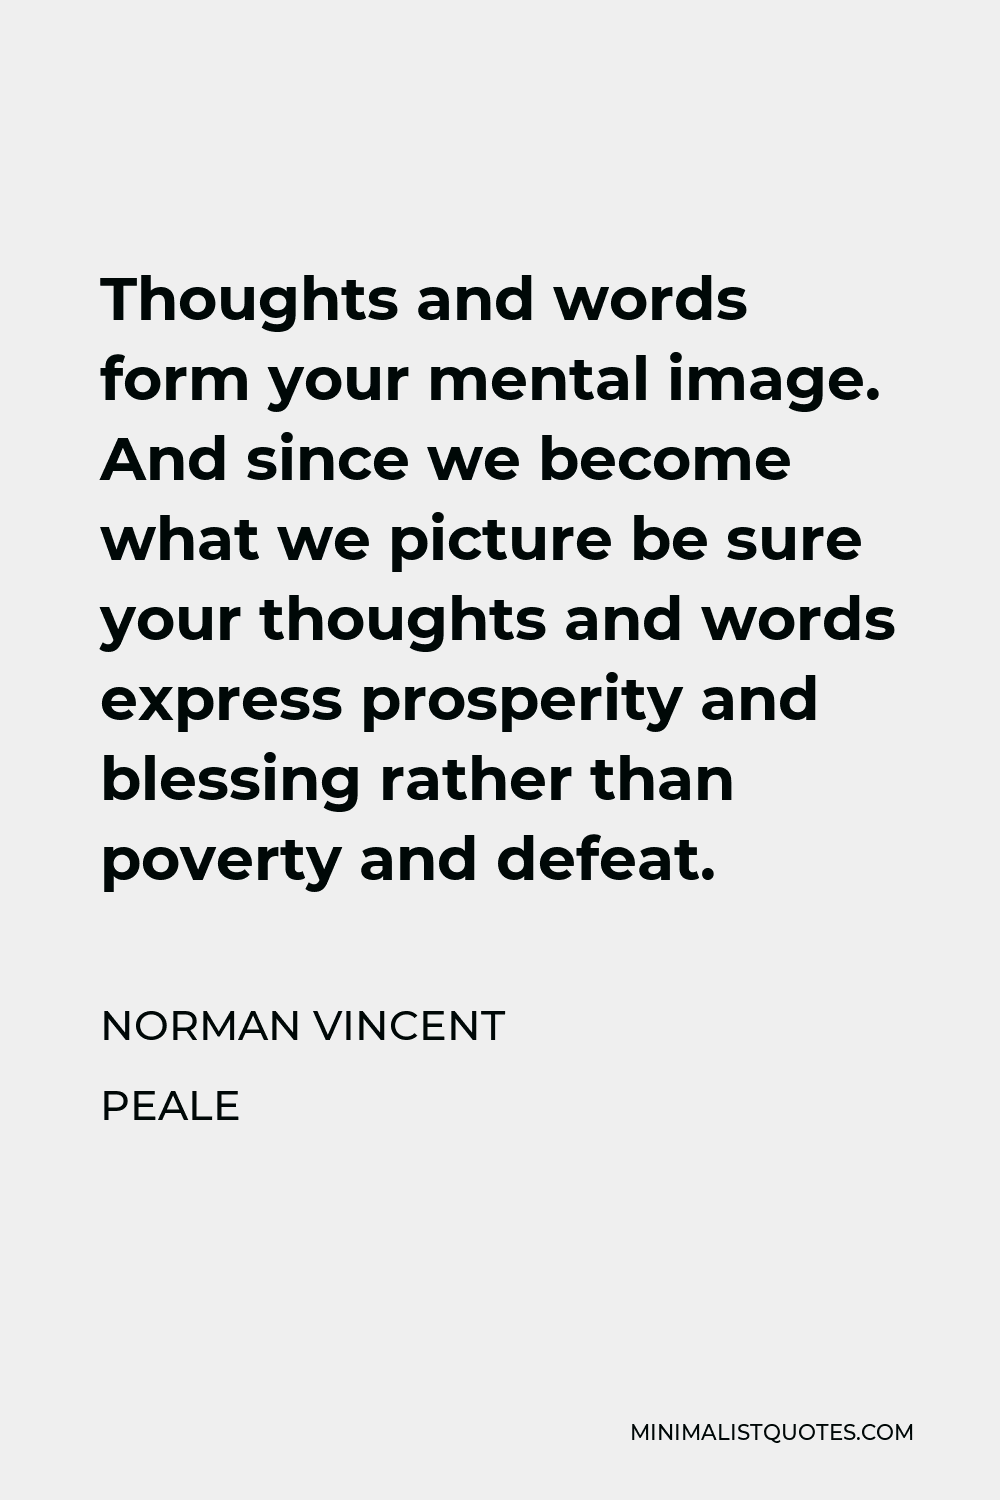 Norman Vincent Peale Quote - Thoughts and words form your mental image. And since we become what we picture be sure your thoughts and words express prosperity and blessing rather than poverty and defeat.